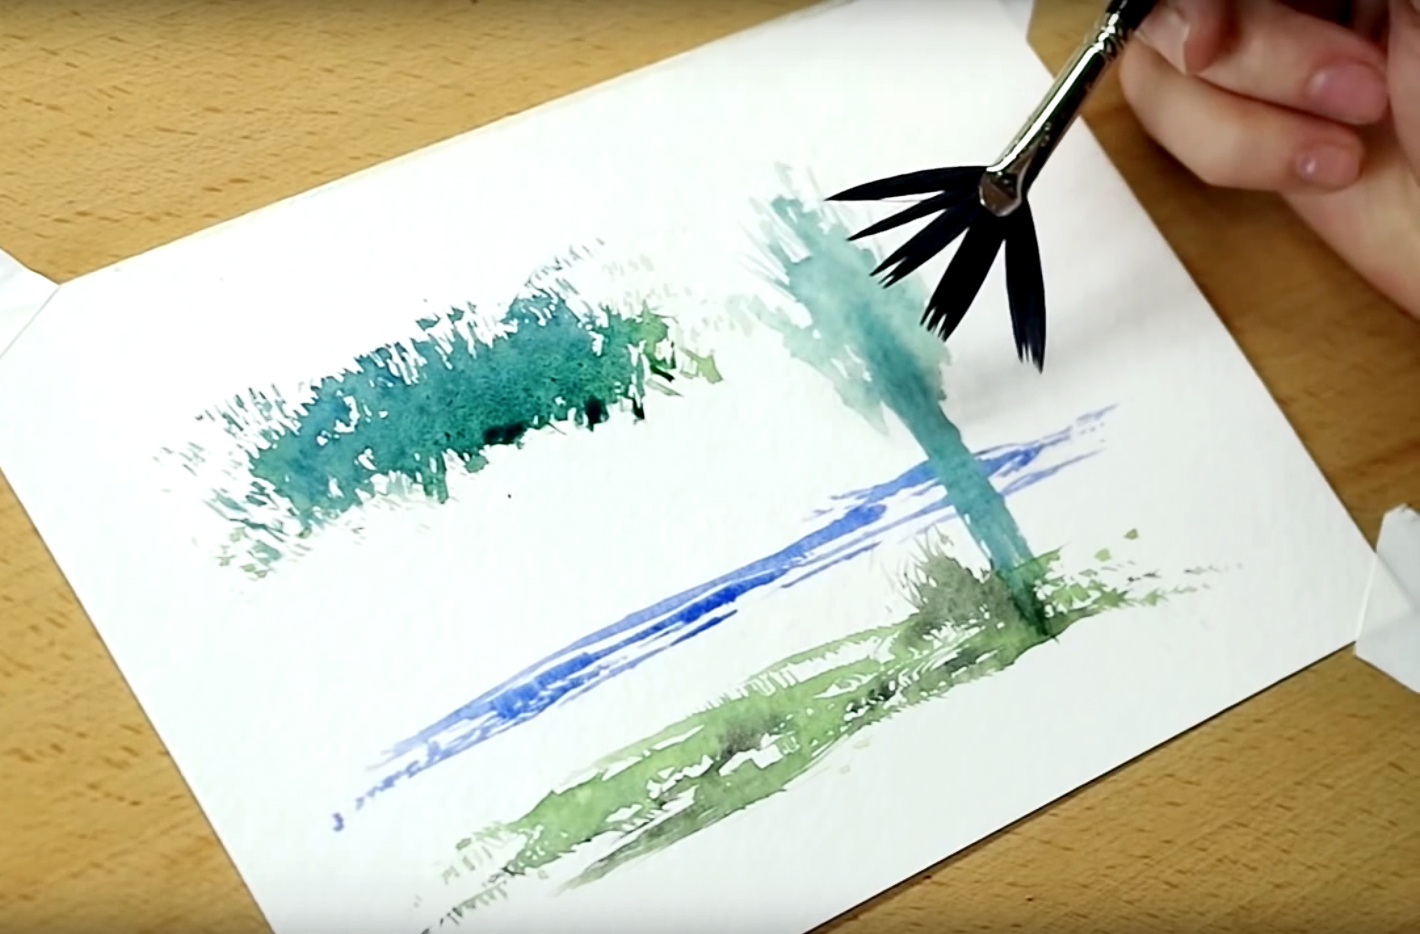 How To Store Watercolor Paintings? 6 Tips to Protect Watercolor